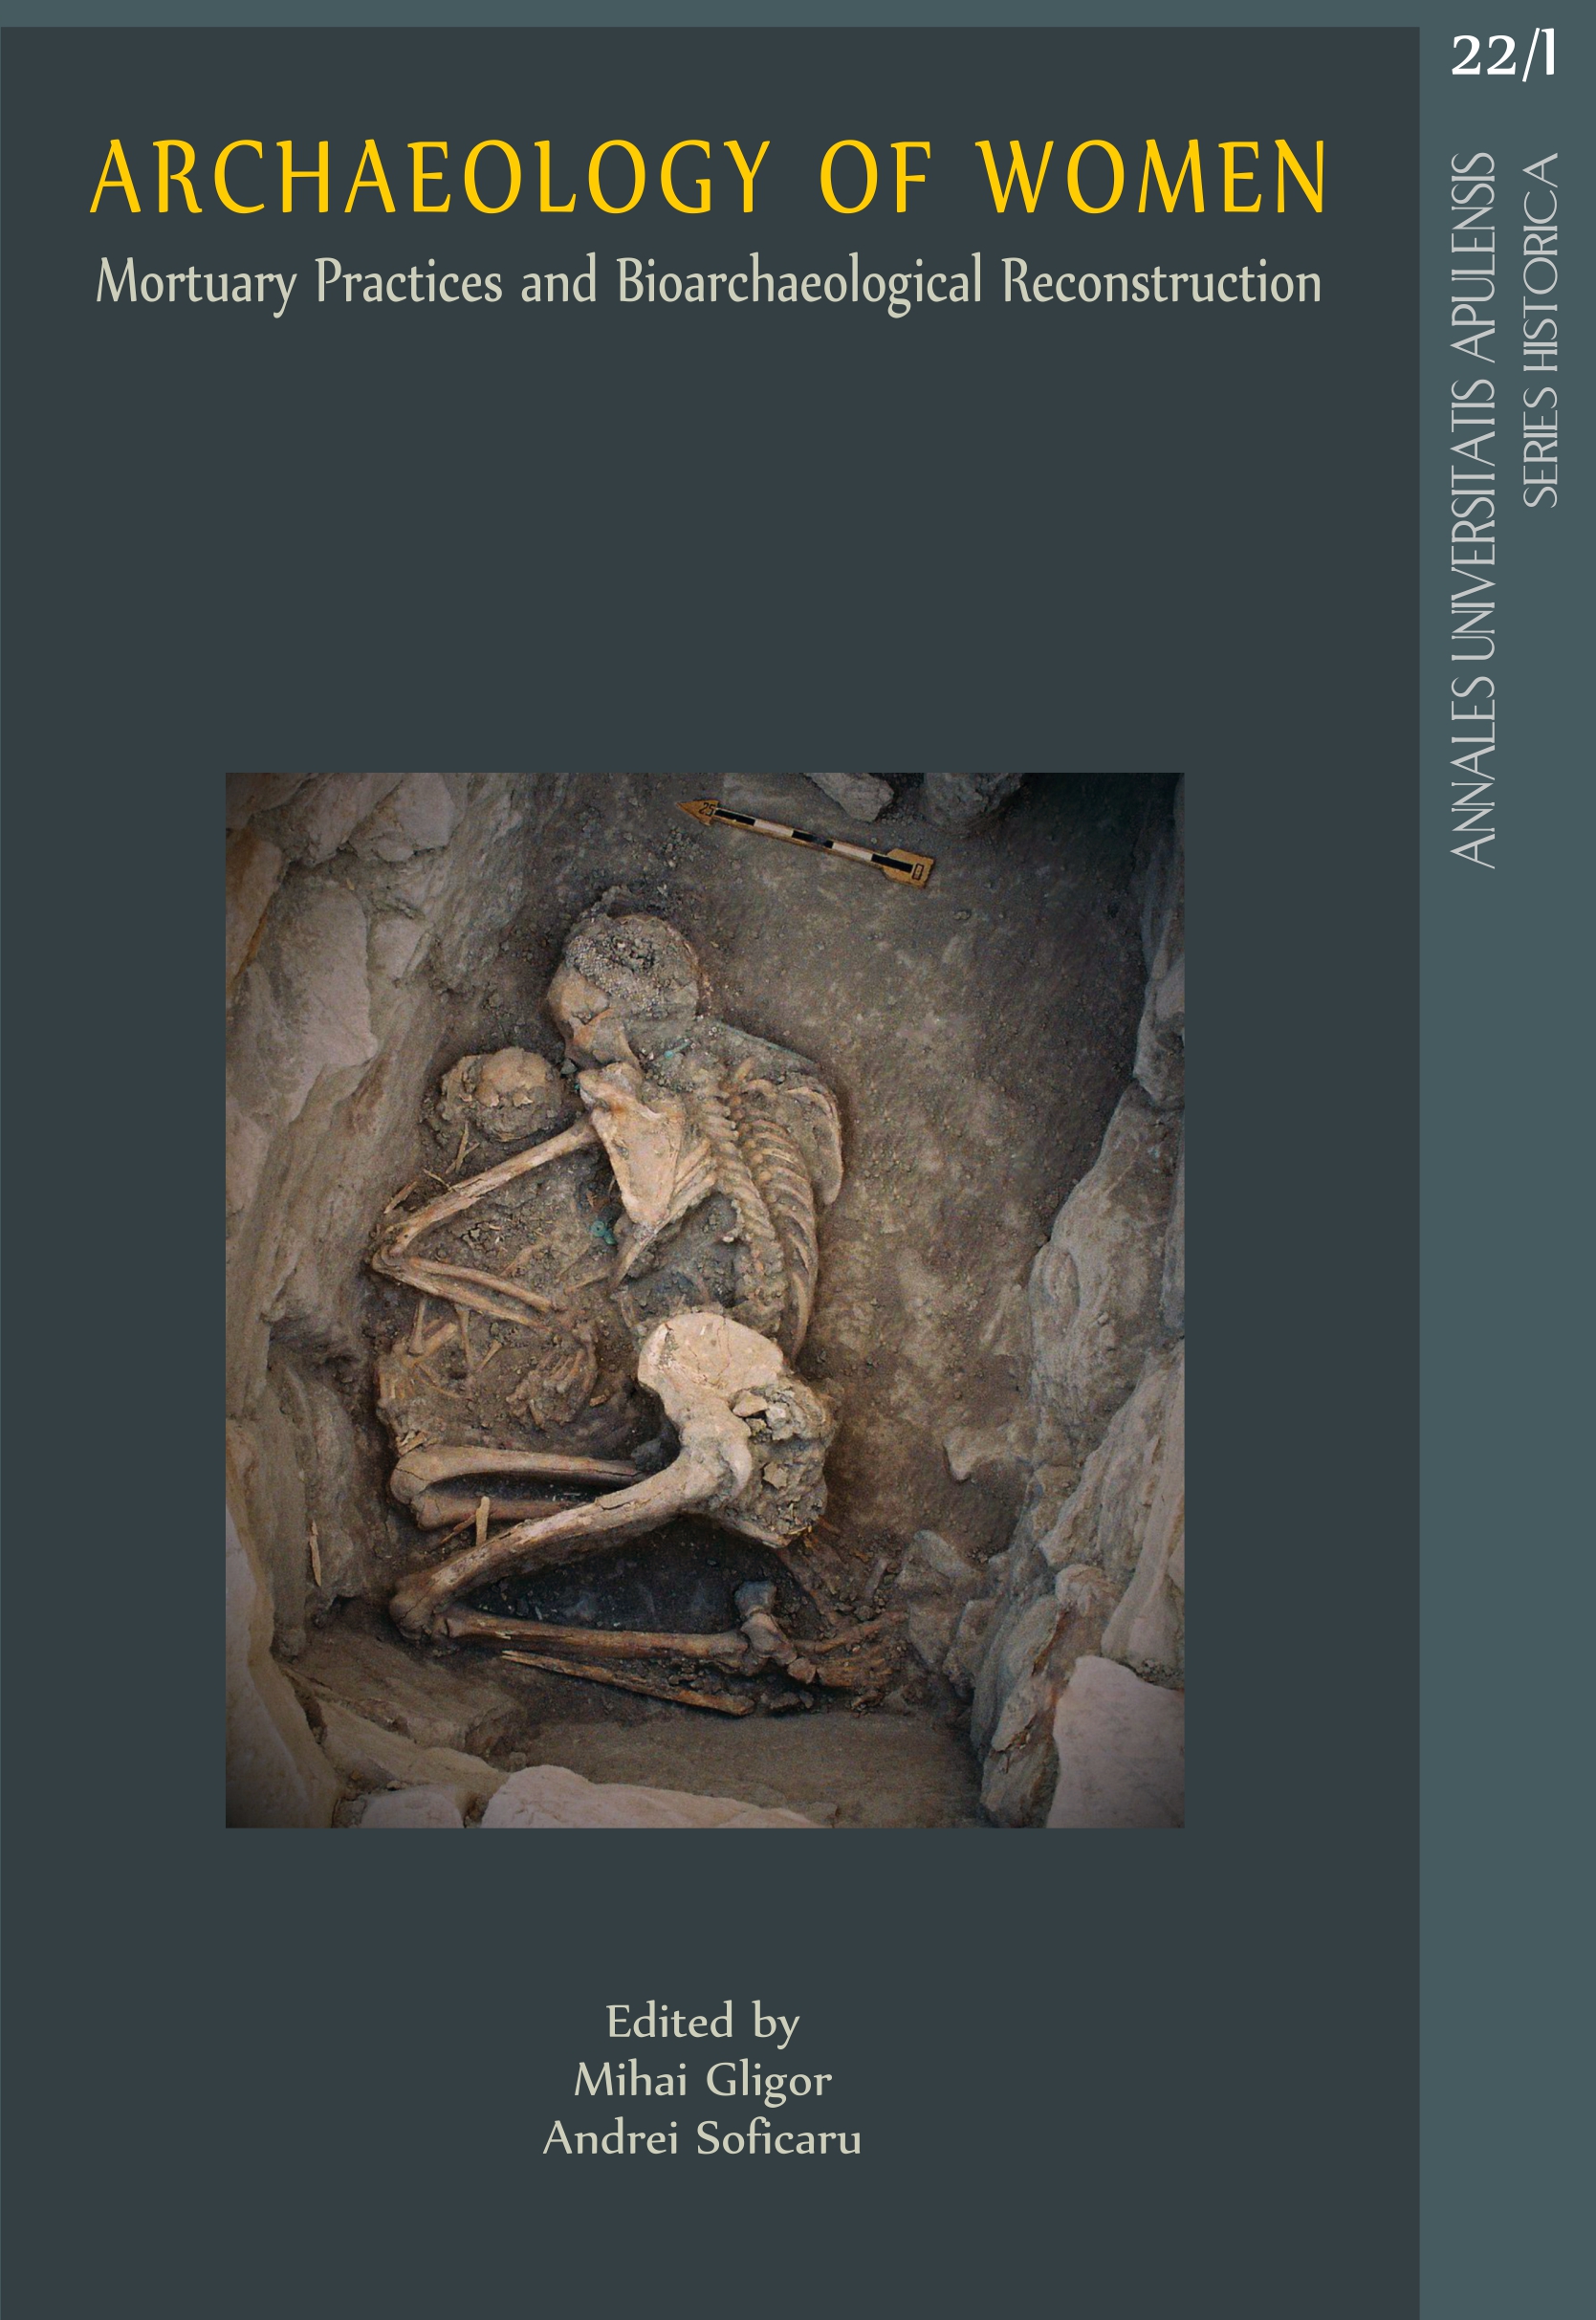 The Women Among the Others. Some Insights Regarding Women’s Status in Eneolithic Society Based on Evidence from Sultana-Malu Roșu Cemetery (Romania) Cover Image